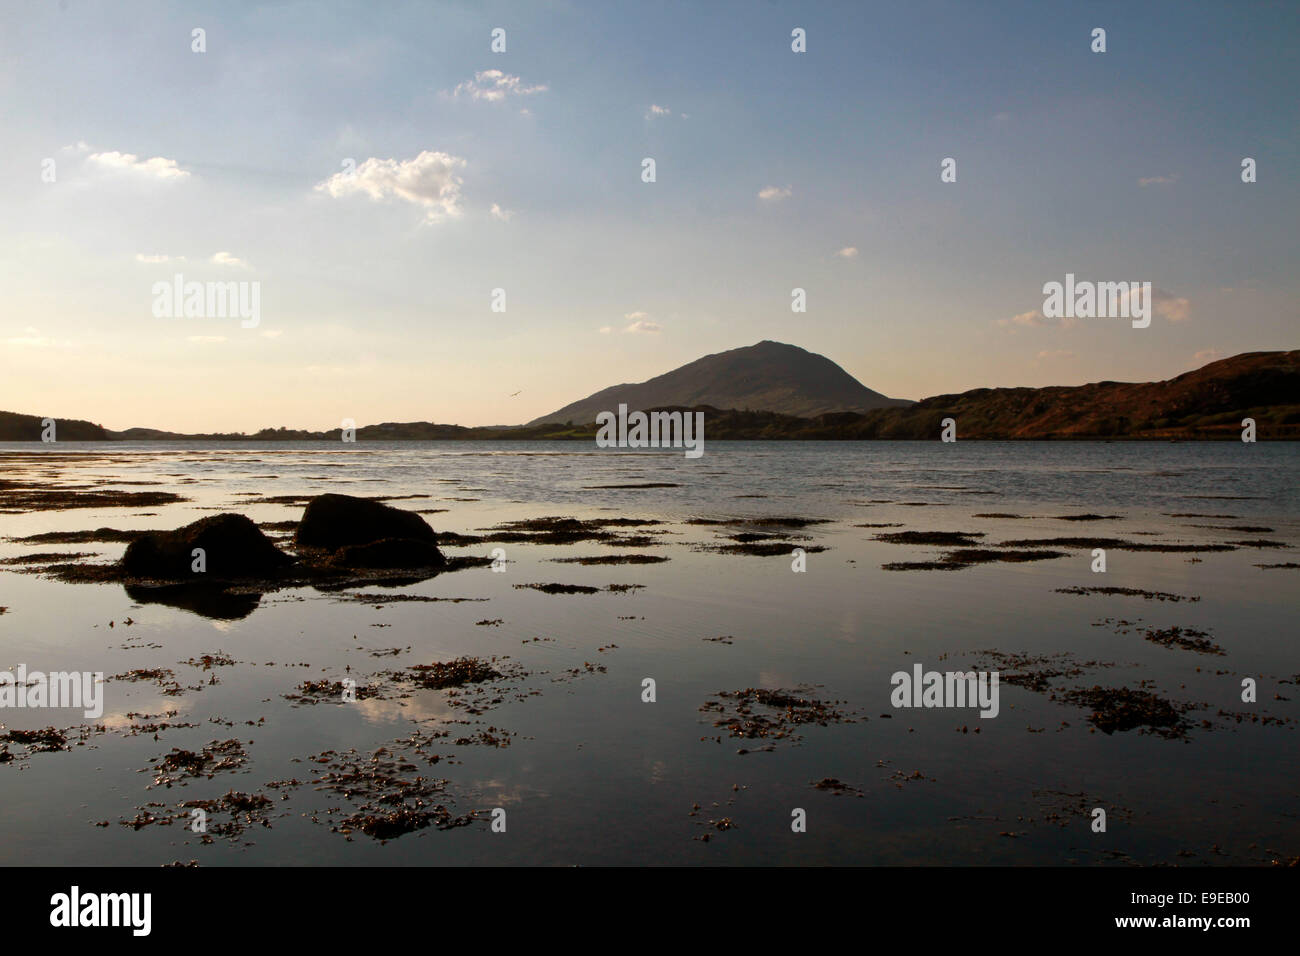 Barnaderg Bay, Ballynakill Harbour, with Tully Mountain in the background, Letterfrack, Connemara, County Galway, Ireland Stock Photo